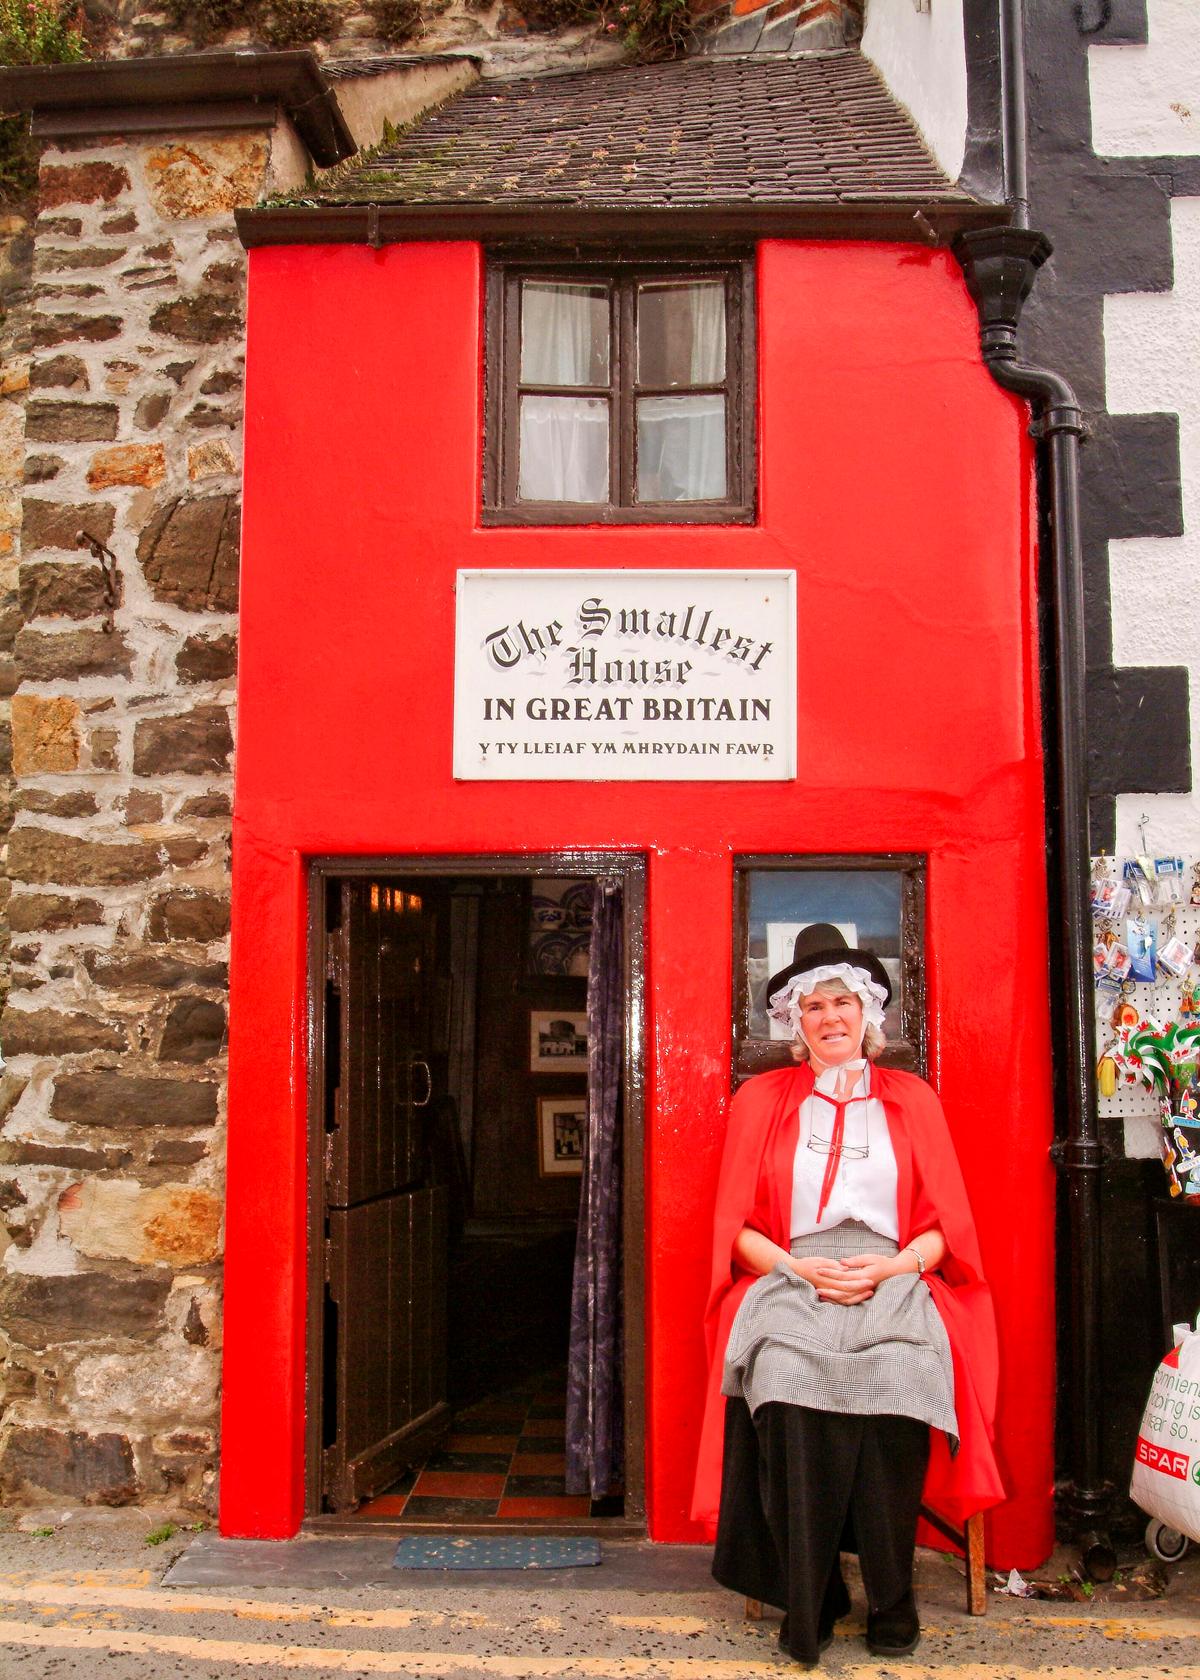 This woman dressed in a traditional Welsh outfit greets visitors to a house in Conwy that's billed as the smallest house in Great Britain. (Copyright Fred J. Eckert)